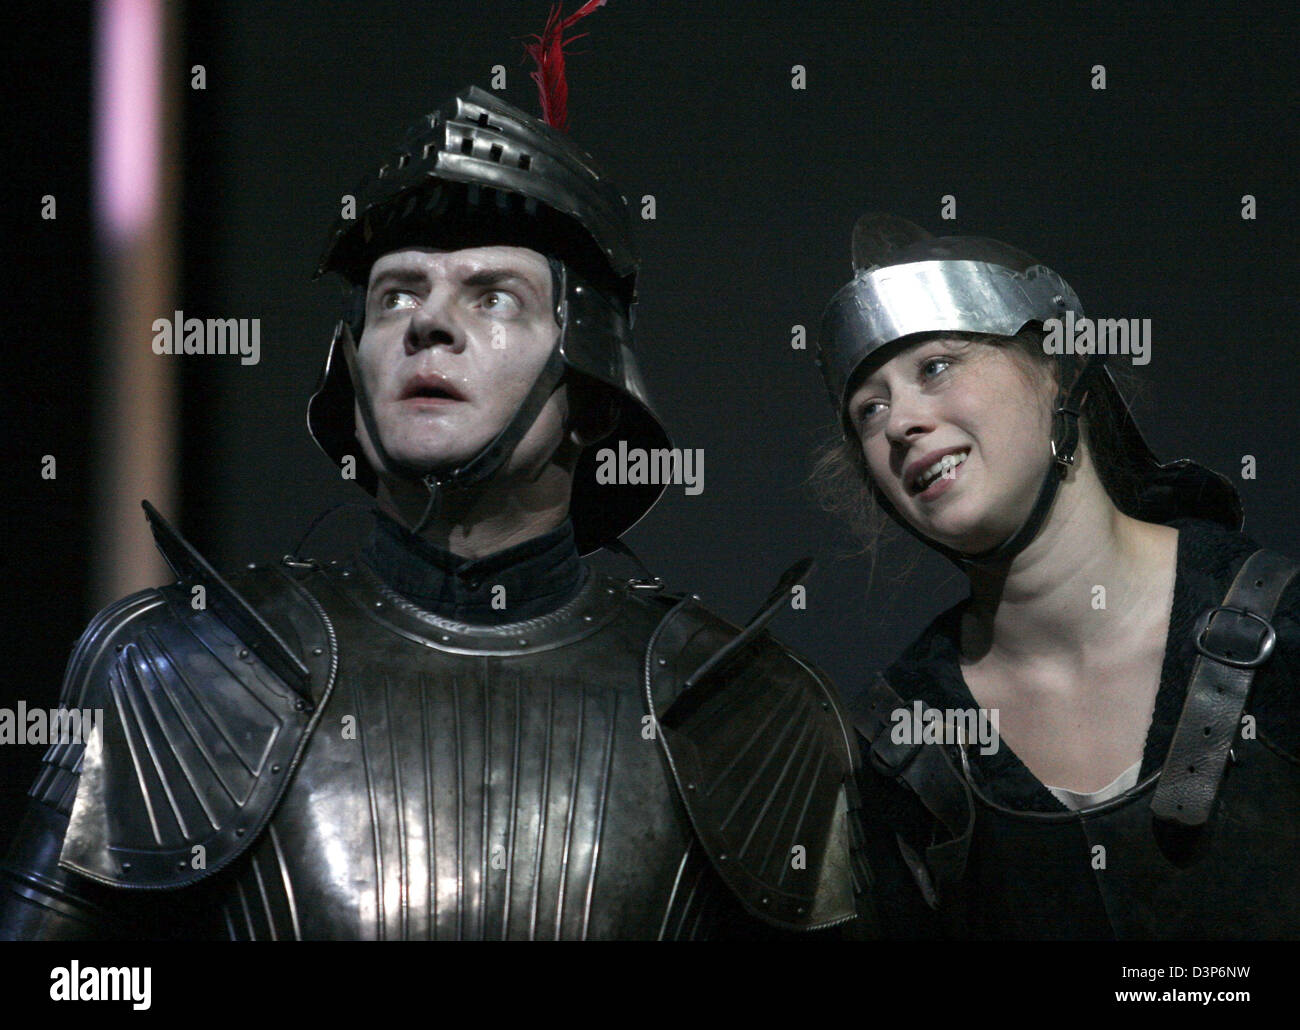 Charlotte Mueller (R) as Joan d'Arc and Veit Schubert (L) as Count Philip pictured during the dress rehearsal of 'The Maid of Orelans' by Friedrich Schiller in Berlin, Germany, 13 September 2006. The staging of Claus Peymann premieres on 15 September 2006. Photo: Claudia Esch-Kenkel Stock Photo